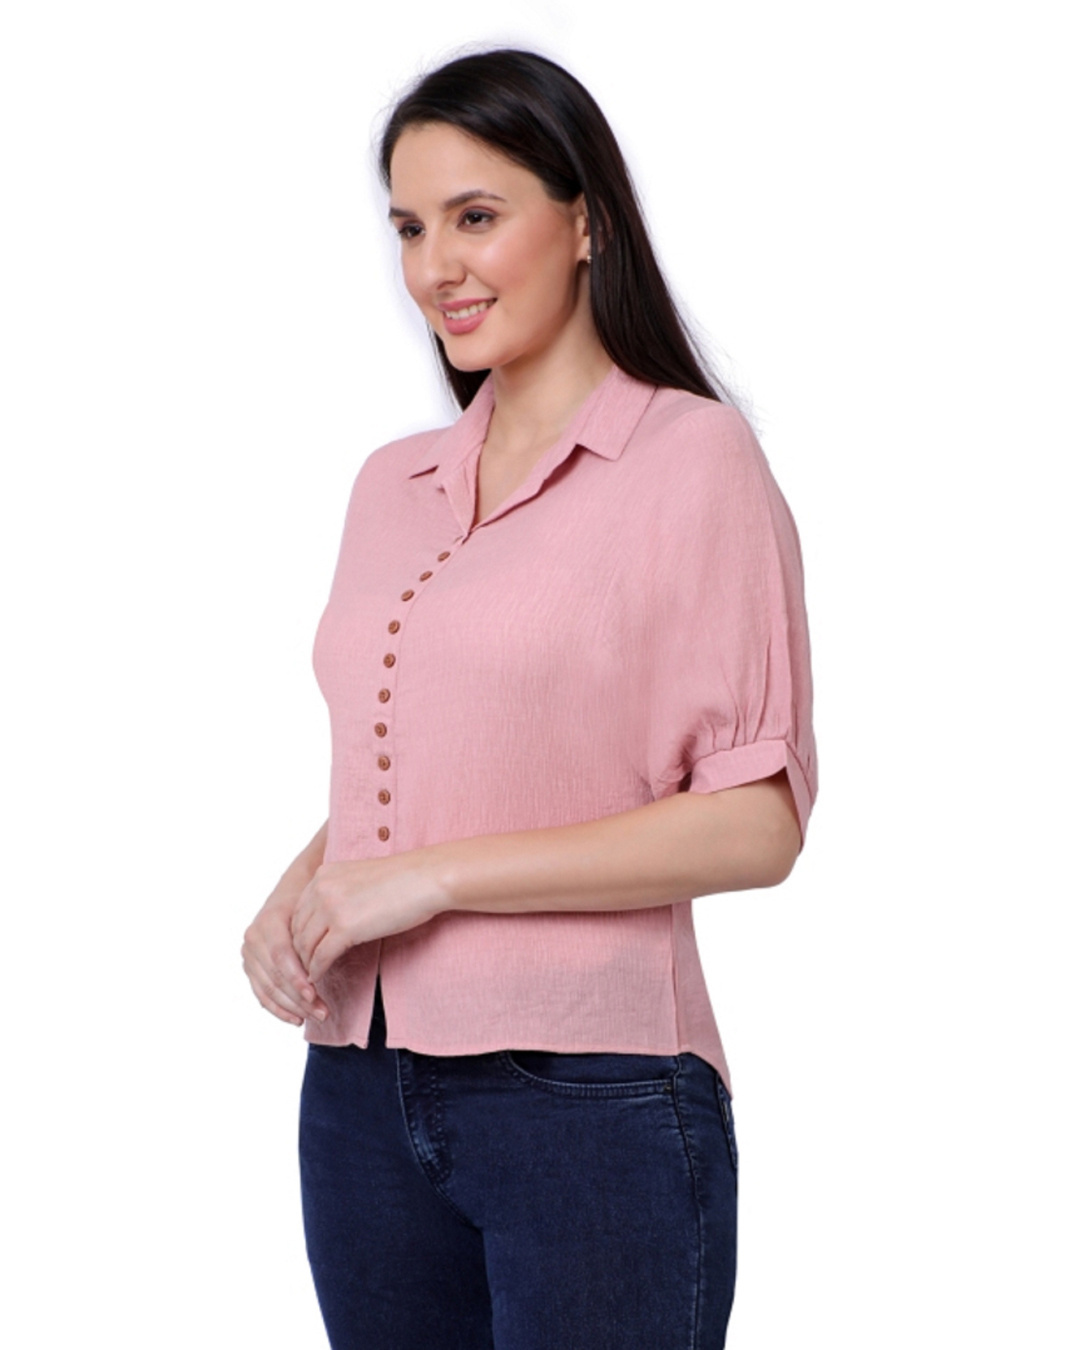 Shop Women's Pink Clean Look Fashion Top-Back